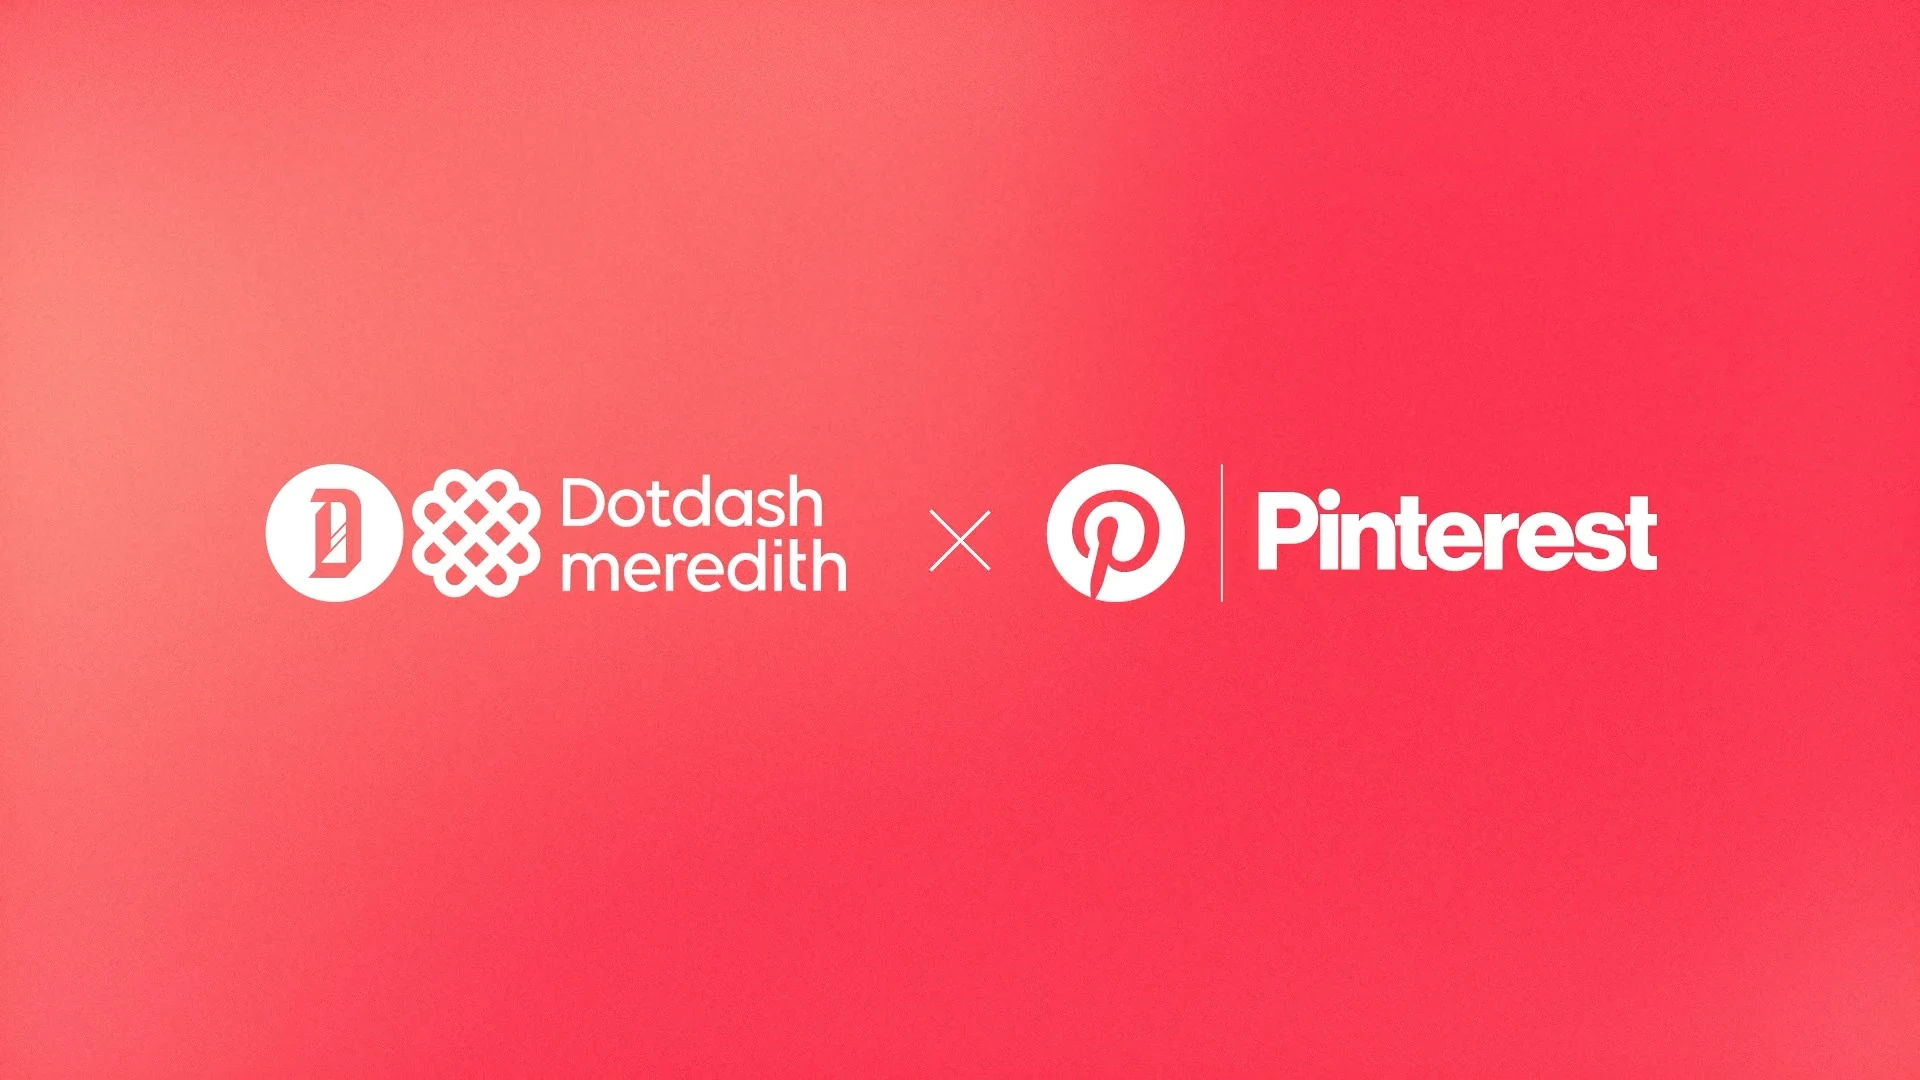 Pinterest partners with Dotdash Meredith on exclusive video content deal